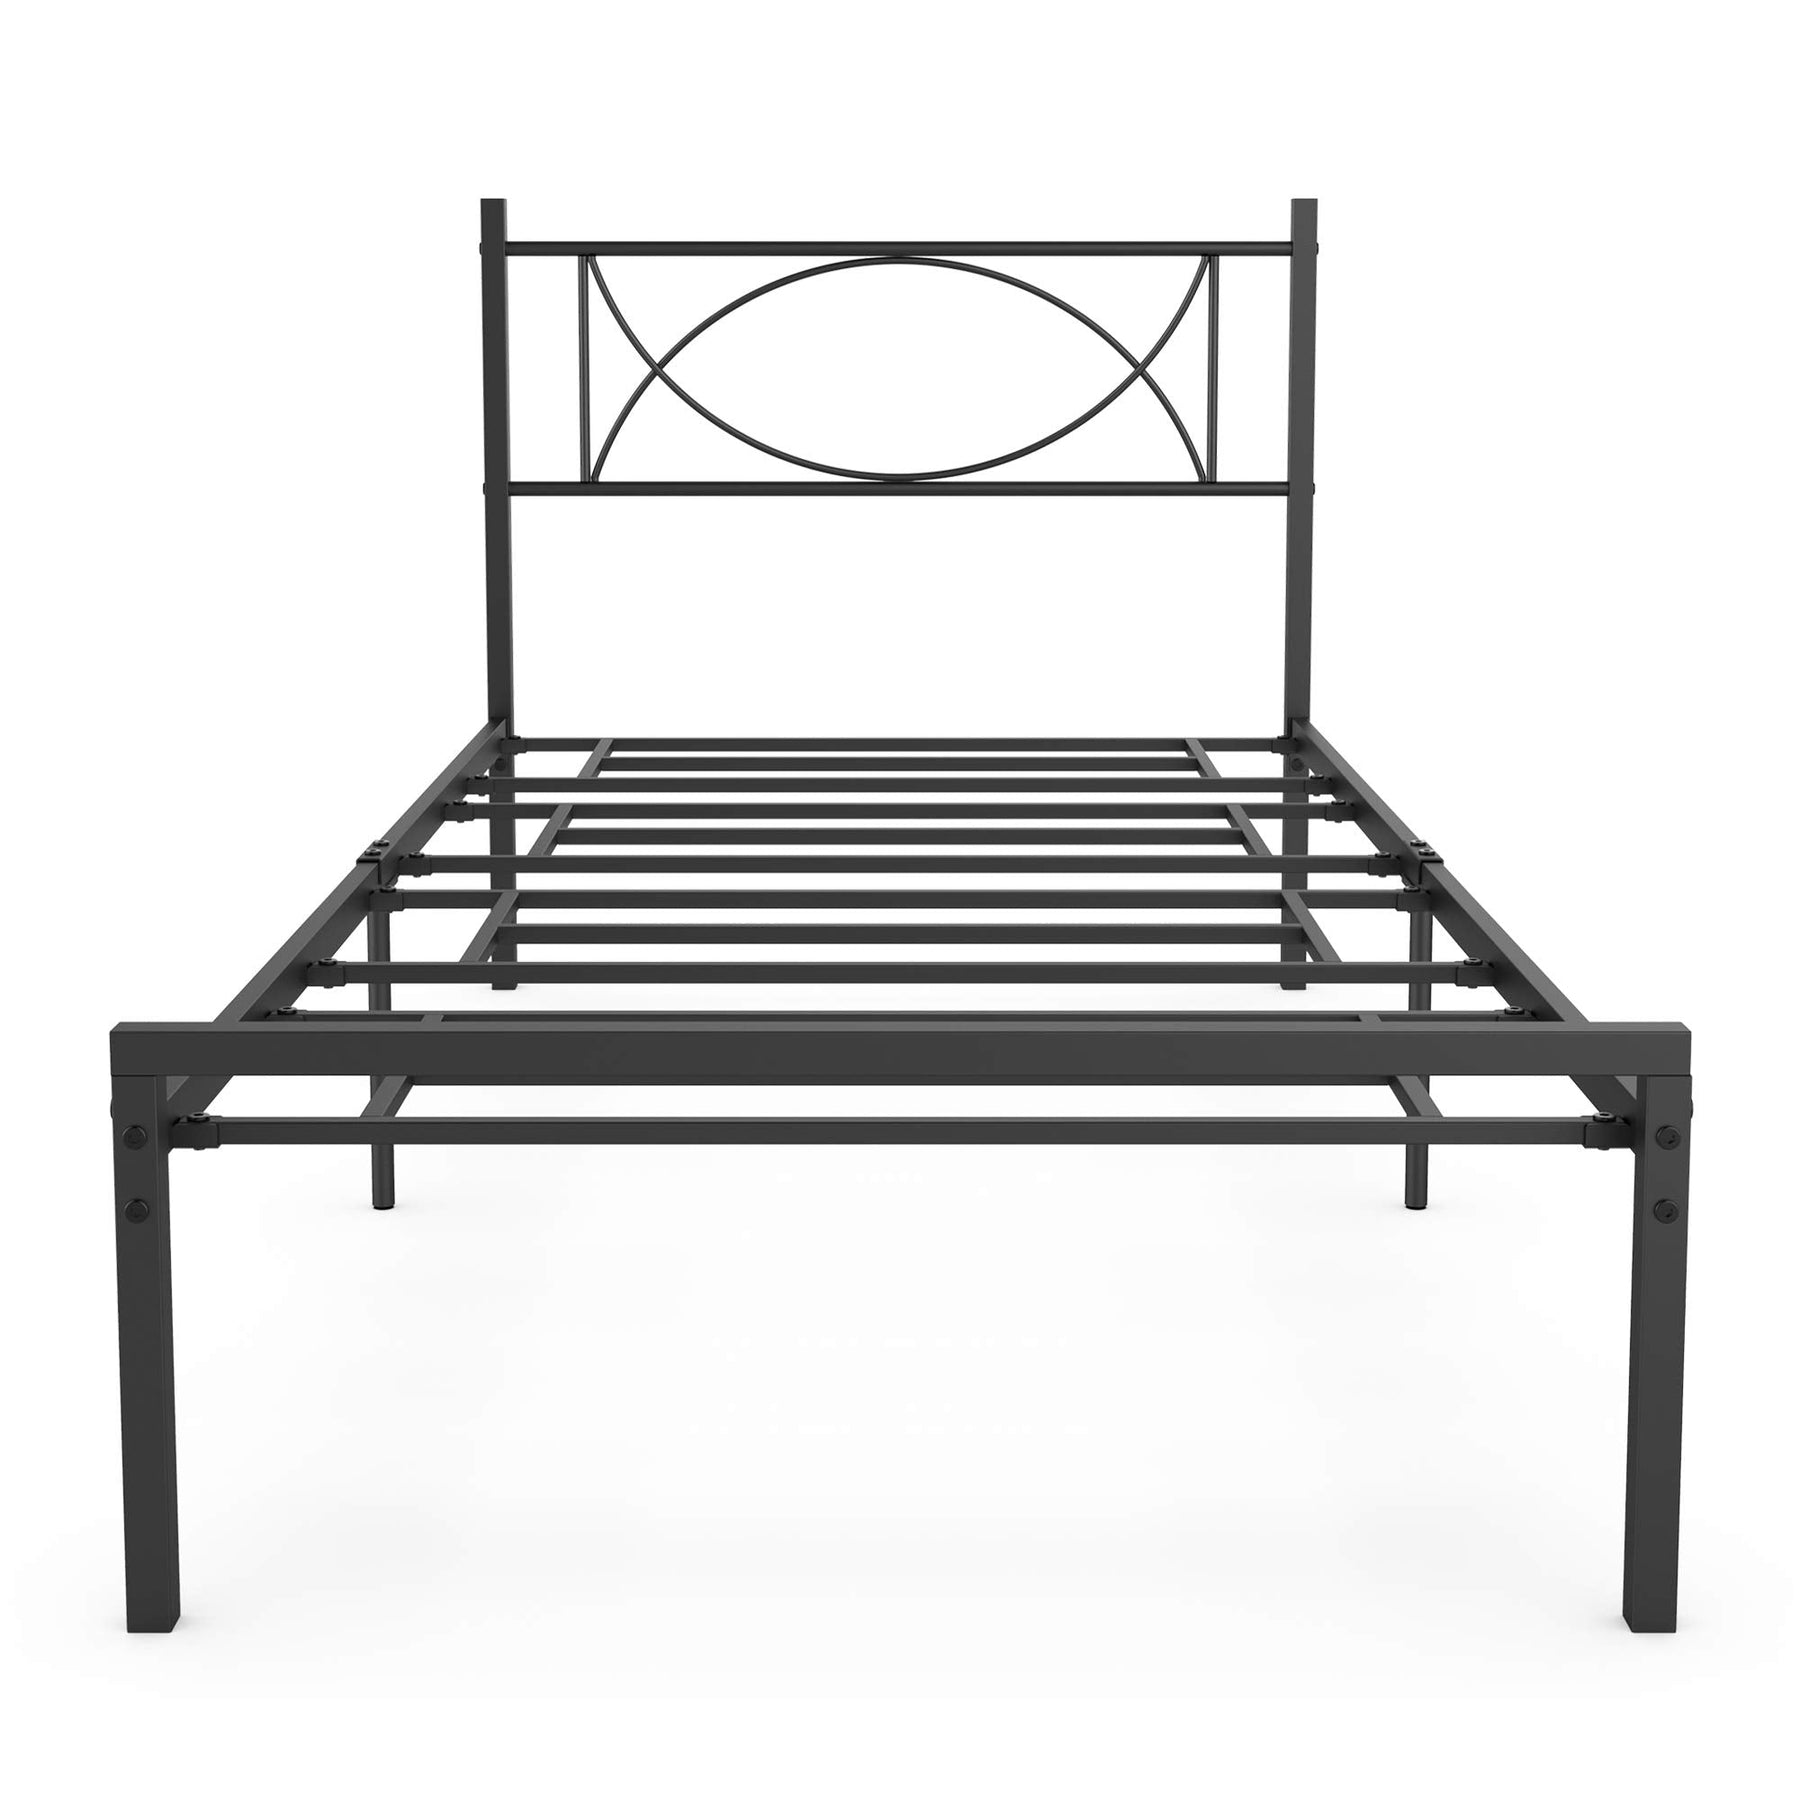 IDEALHOUSE Metal Platform Bed Frame with Sturdy Steel Bed Slats - Twin Size